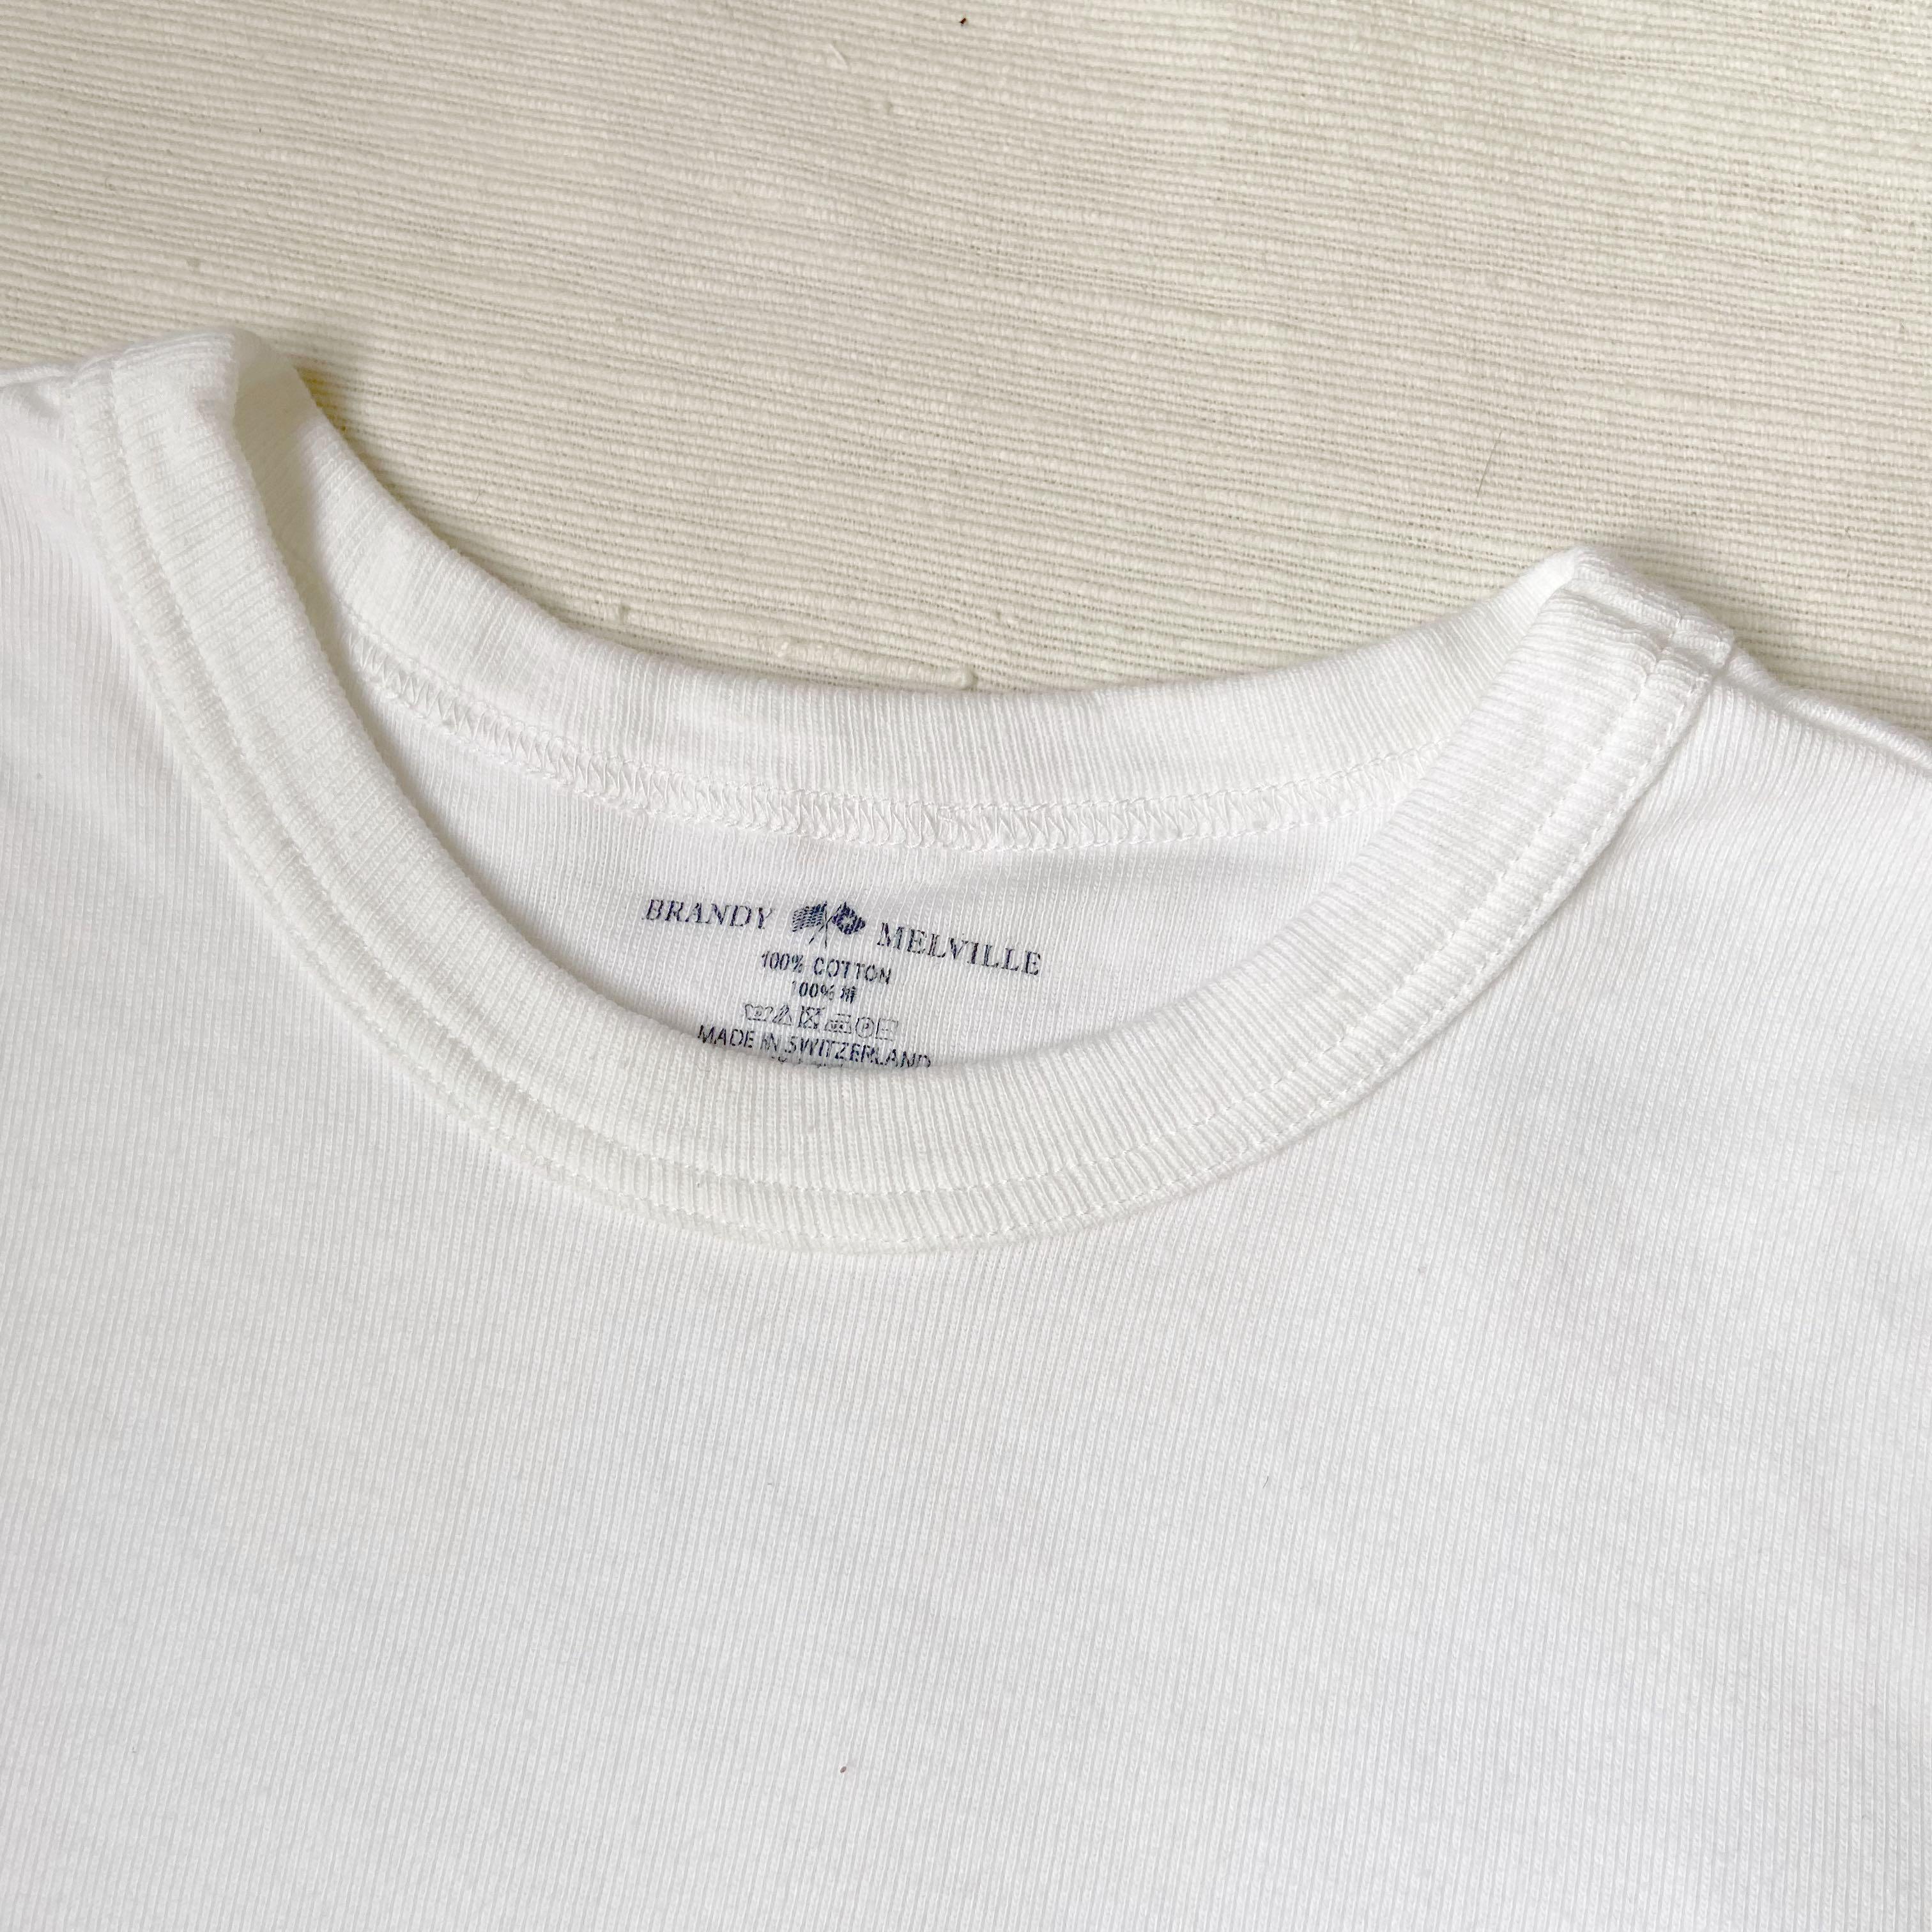 T-shirt Brandy Melville White size Taille Unique International in